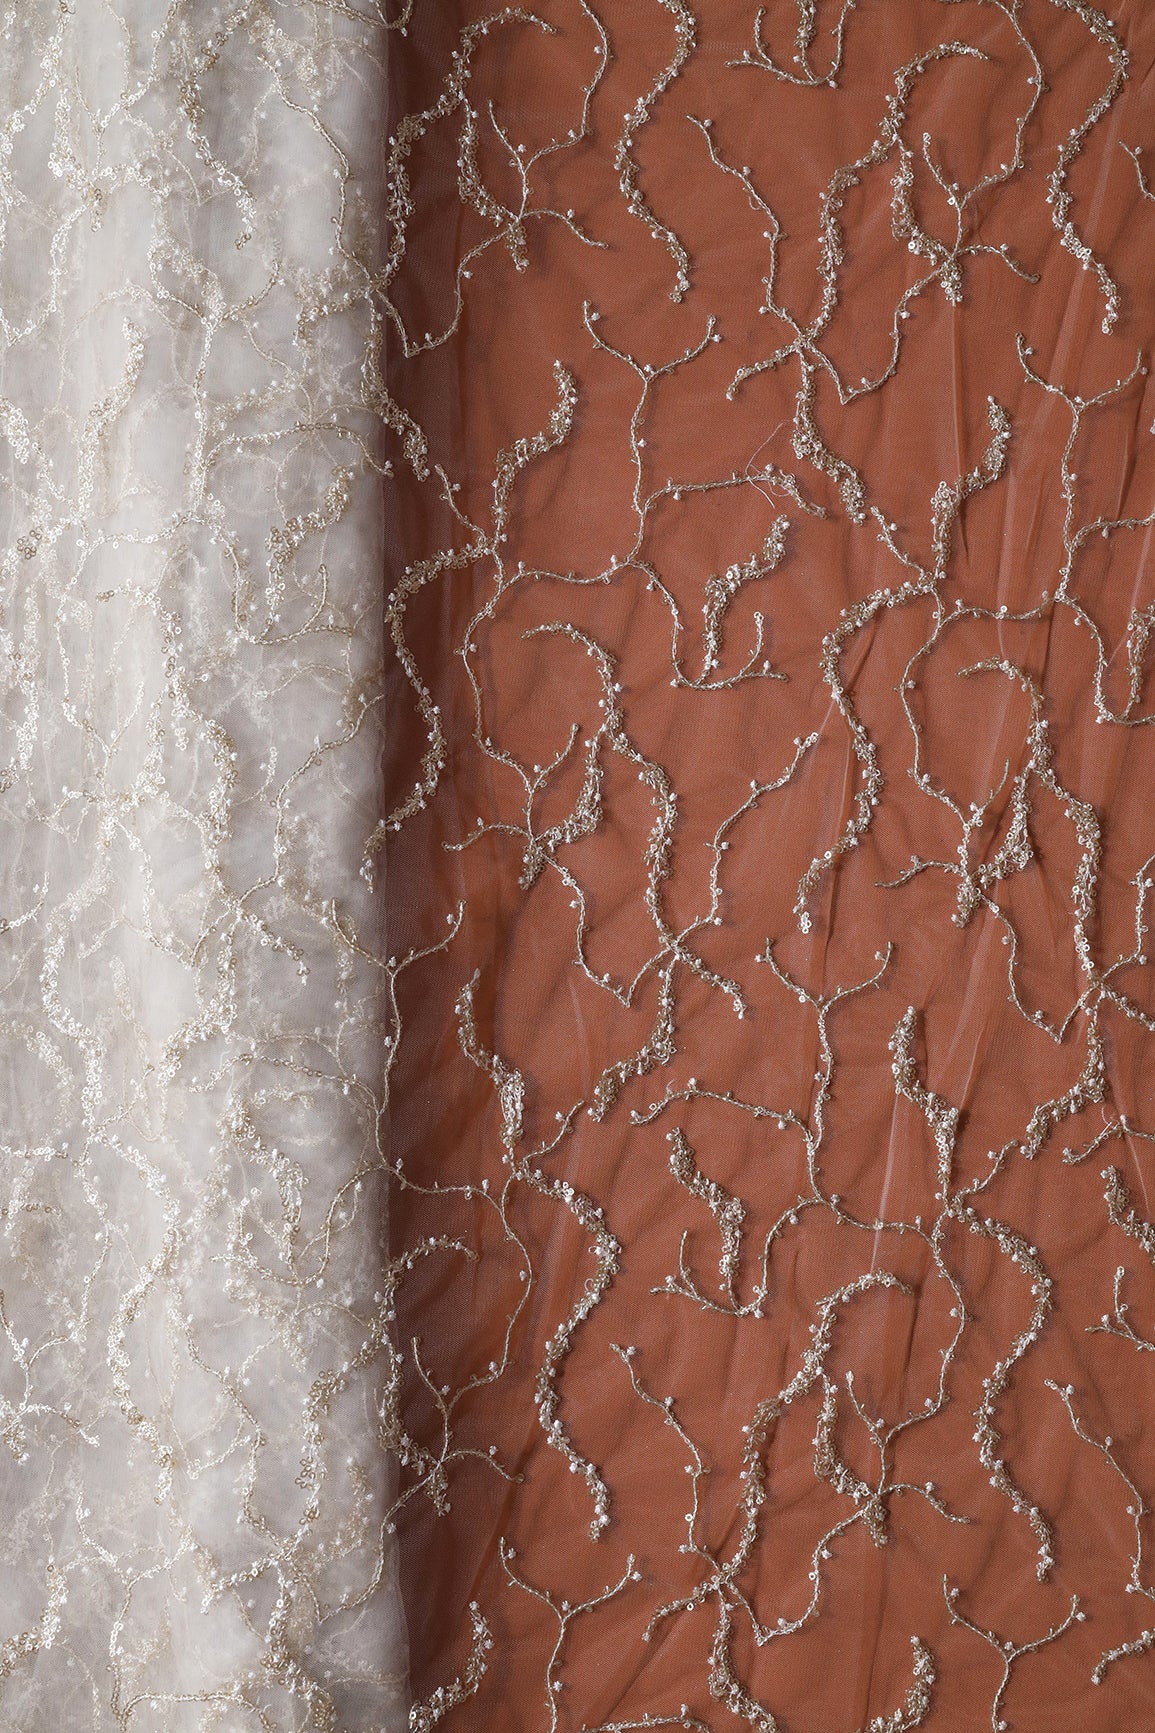 White Thread With Gold Glitter Sequins Abstract Embroidery On White Dyeable Soft Net Fabric